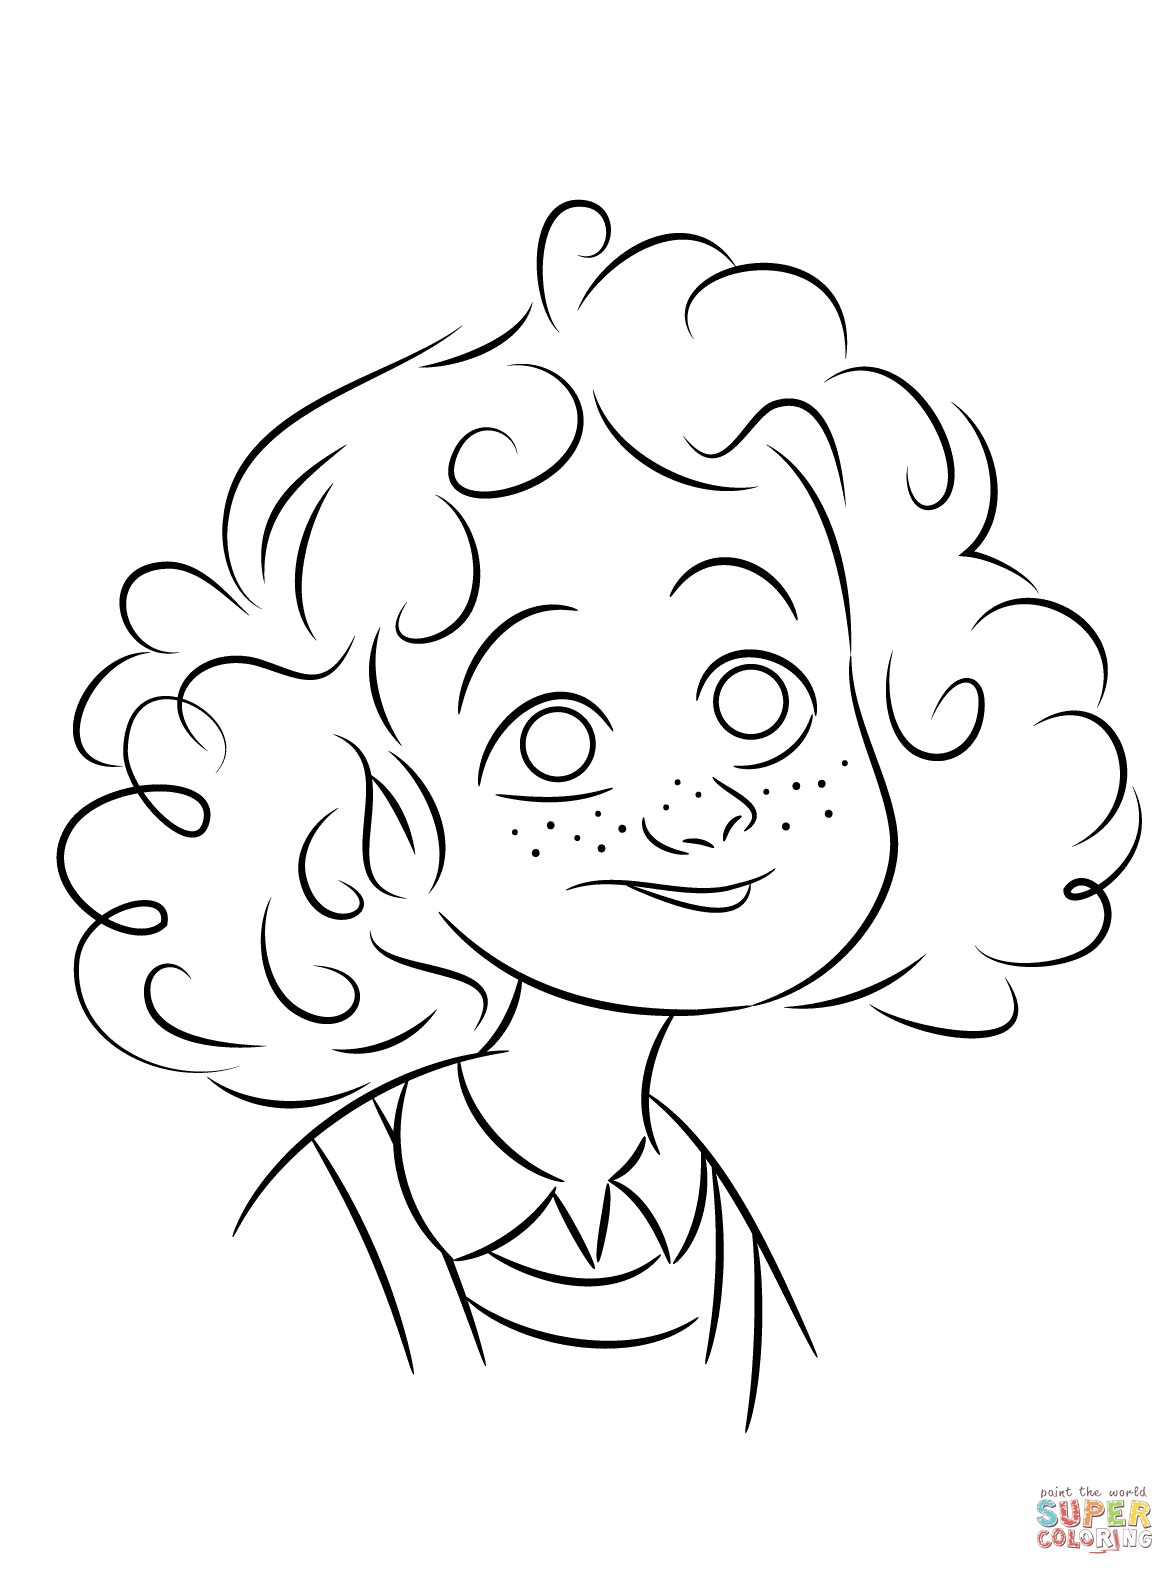 Annie - Coloring Pages for Kids and for Adults